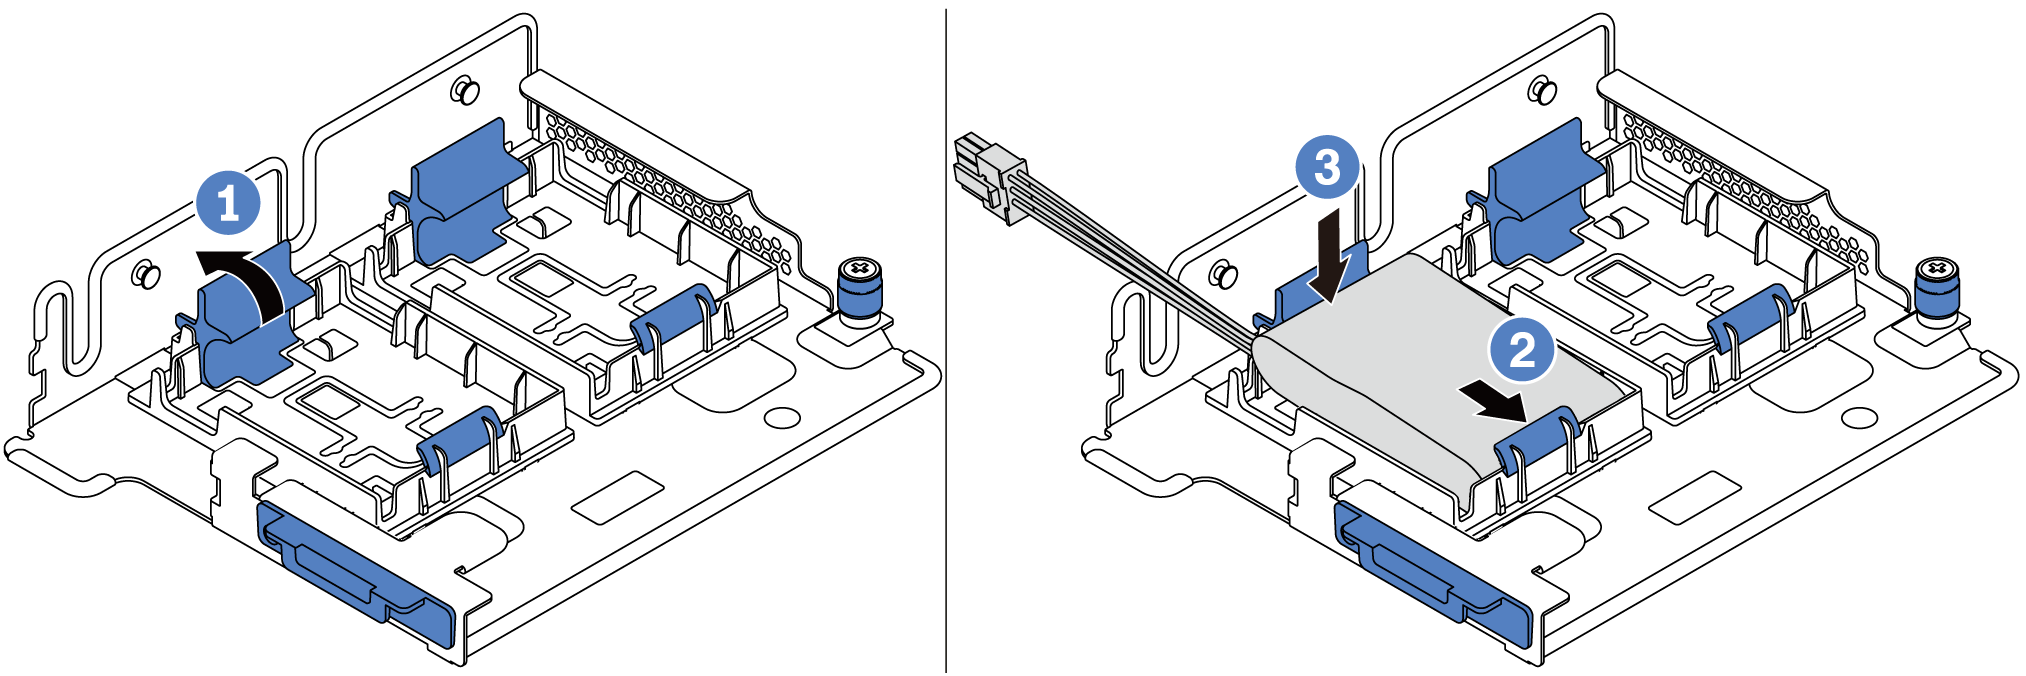 Install a super capacitor module on the M.2/riser support bracket.